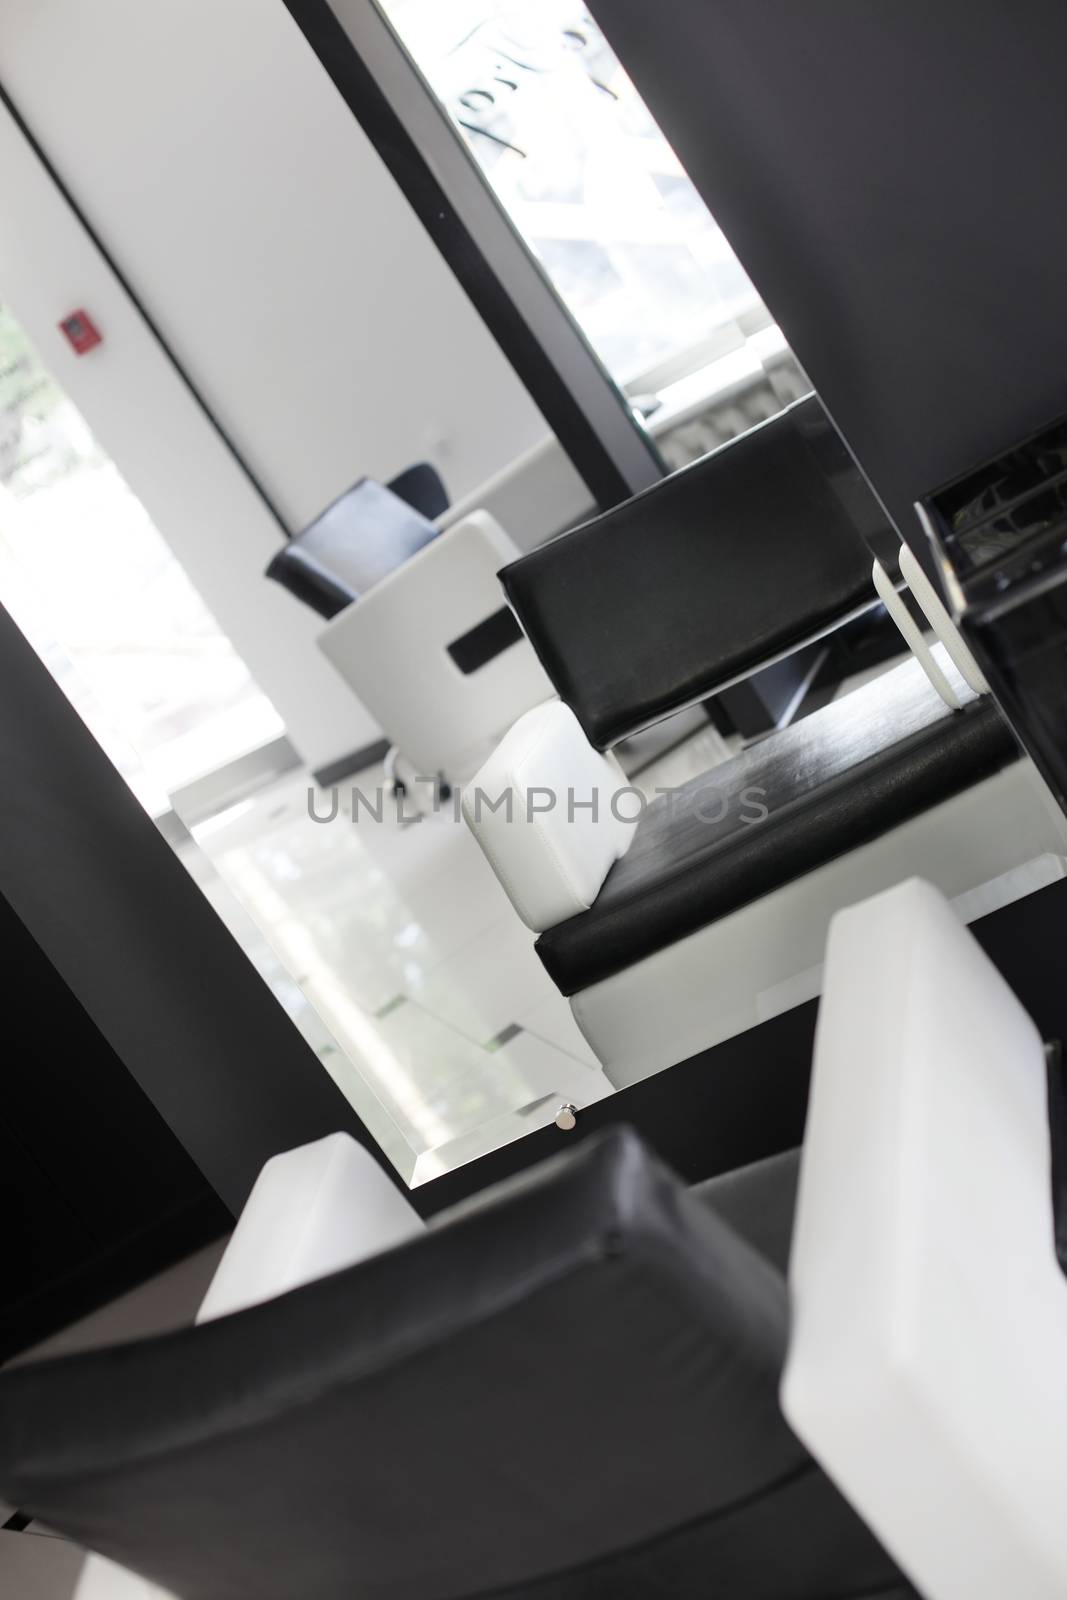 part of beauty salon interior by fiphoto